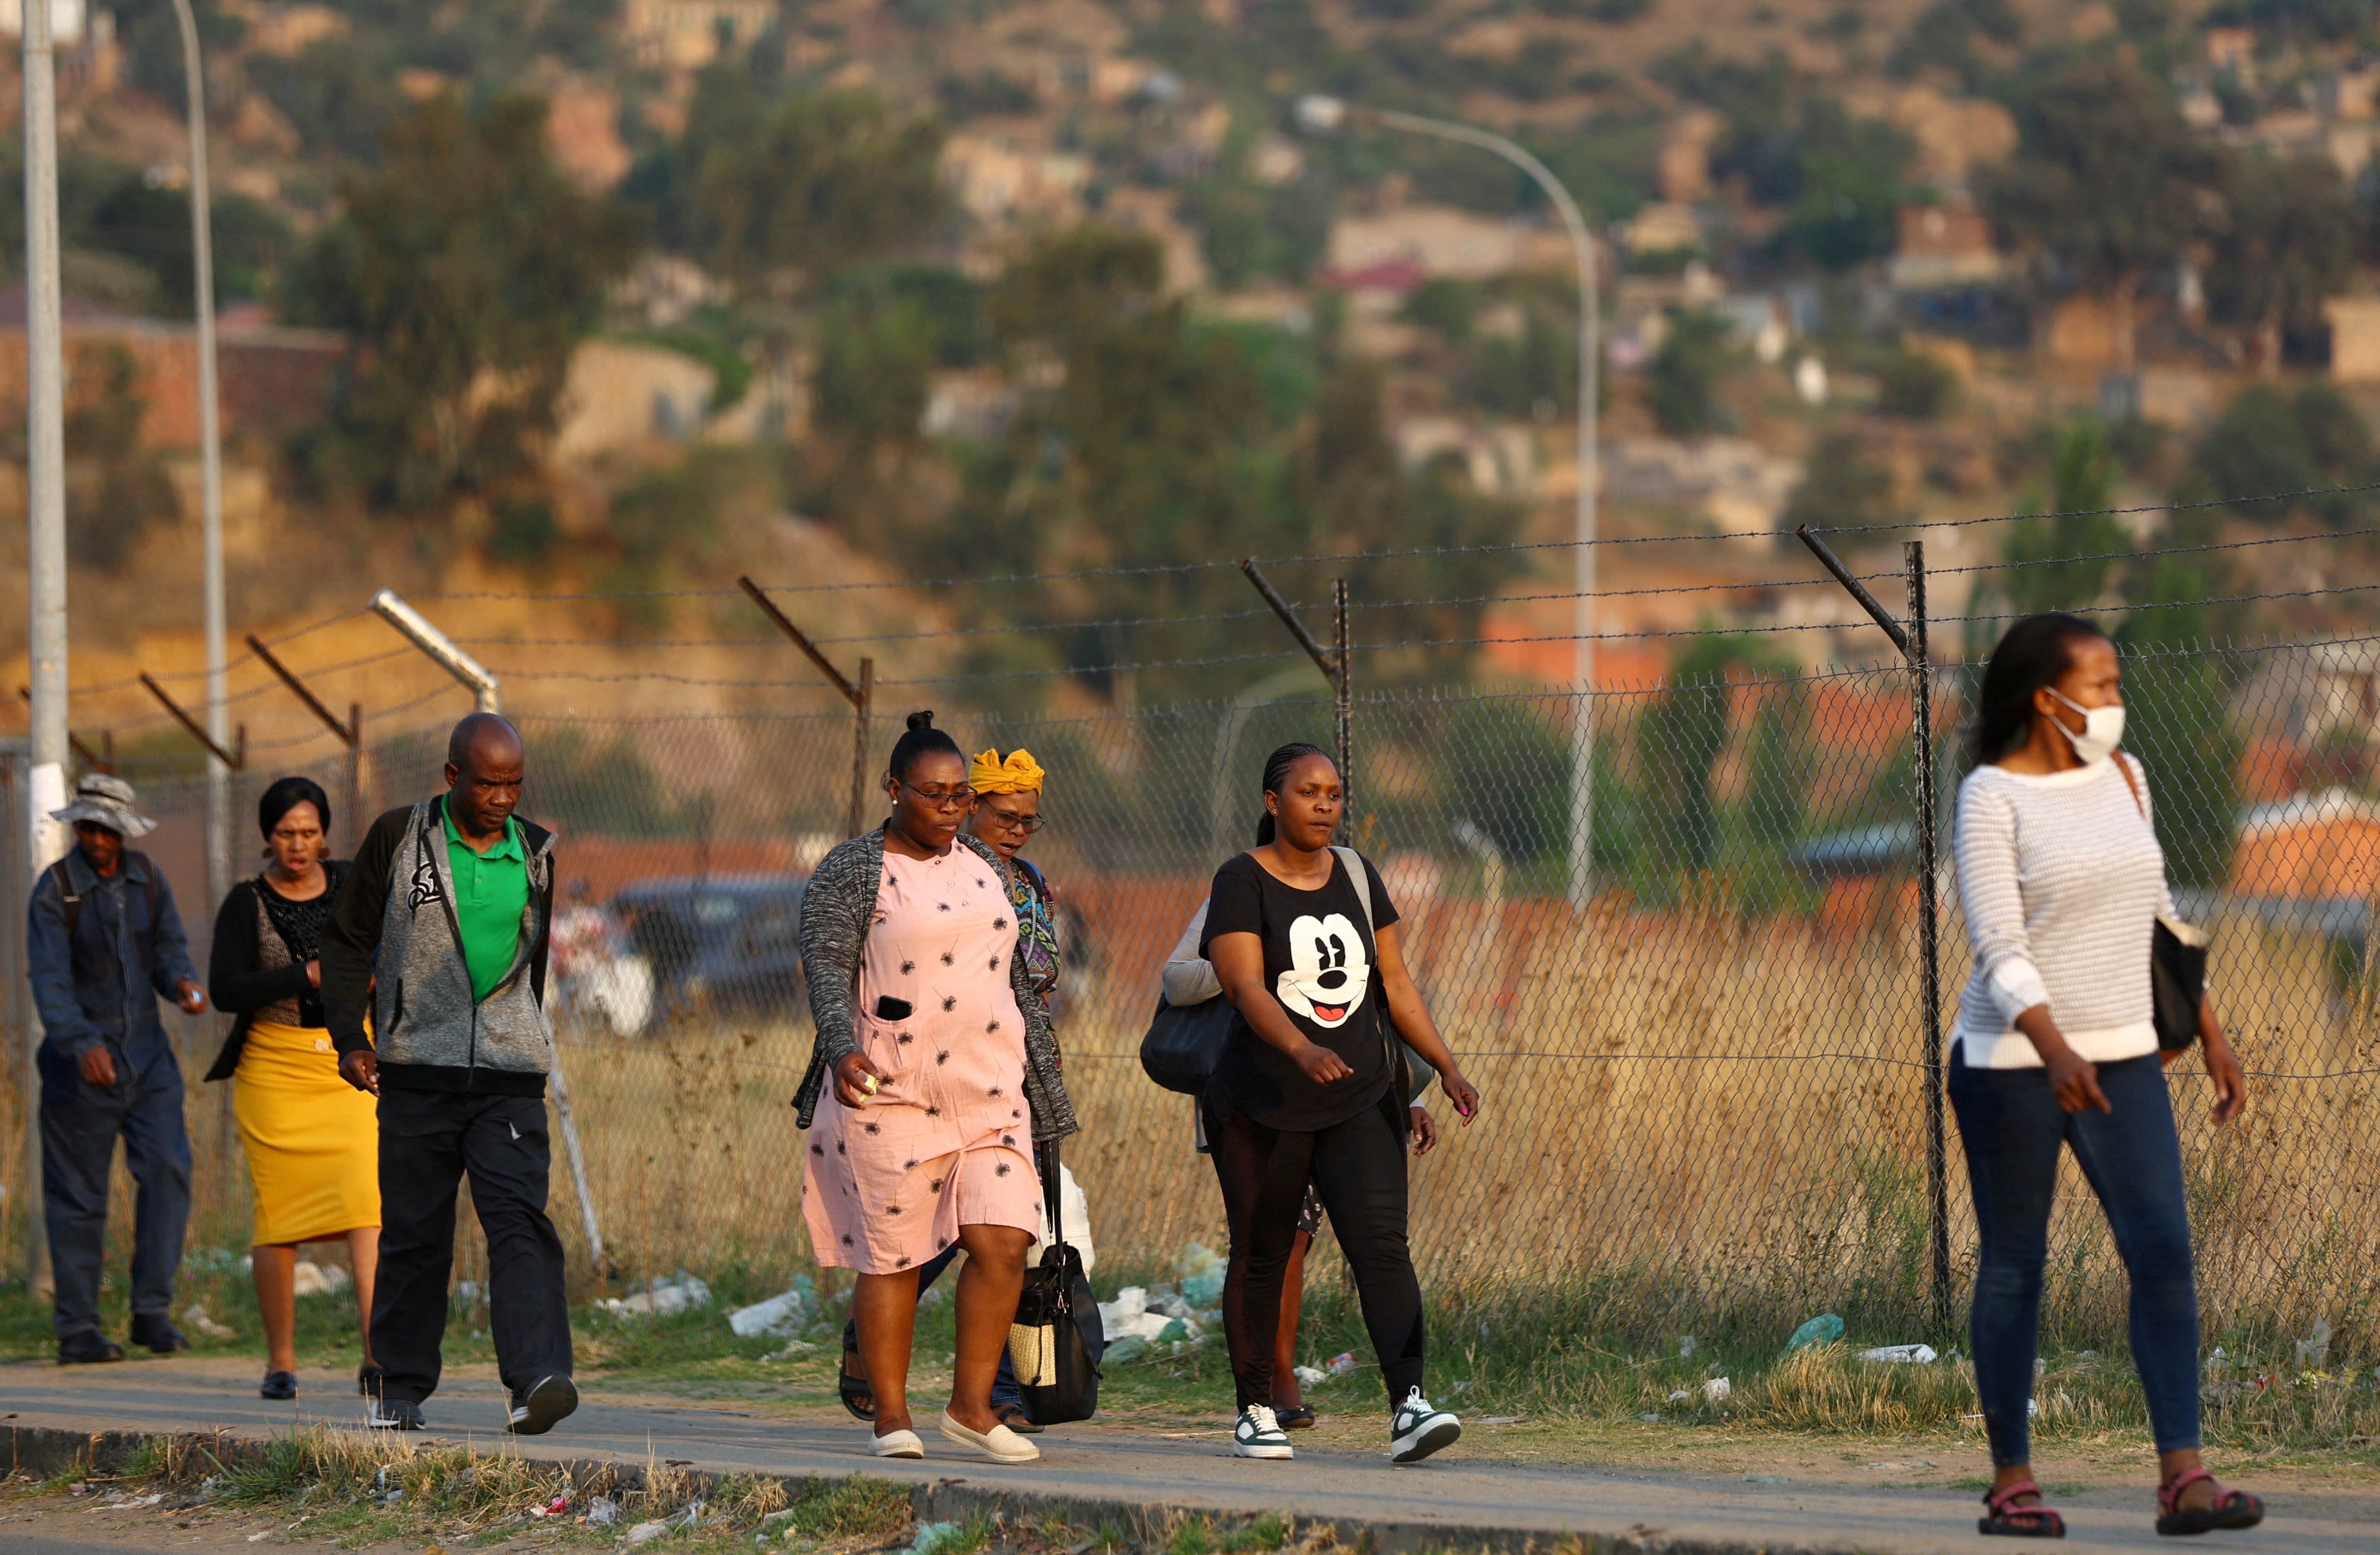 Factory workers walk home after work, ahead of the general elections, outside the capital Maseru in Lesotho